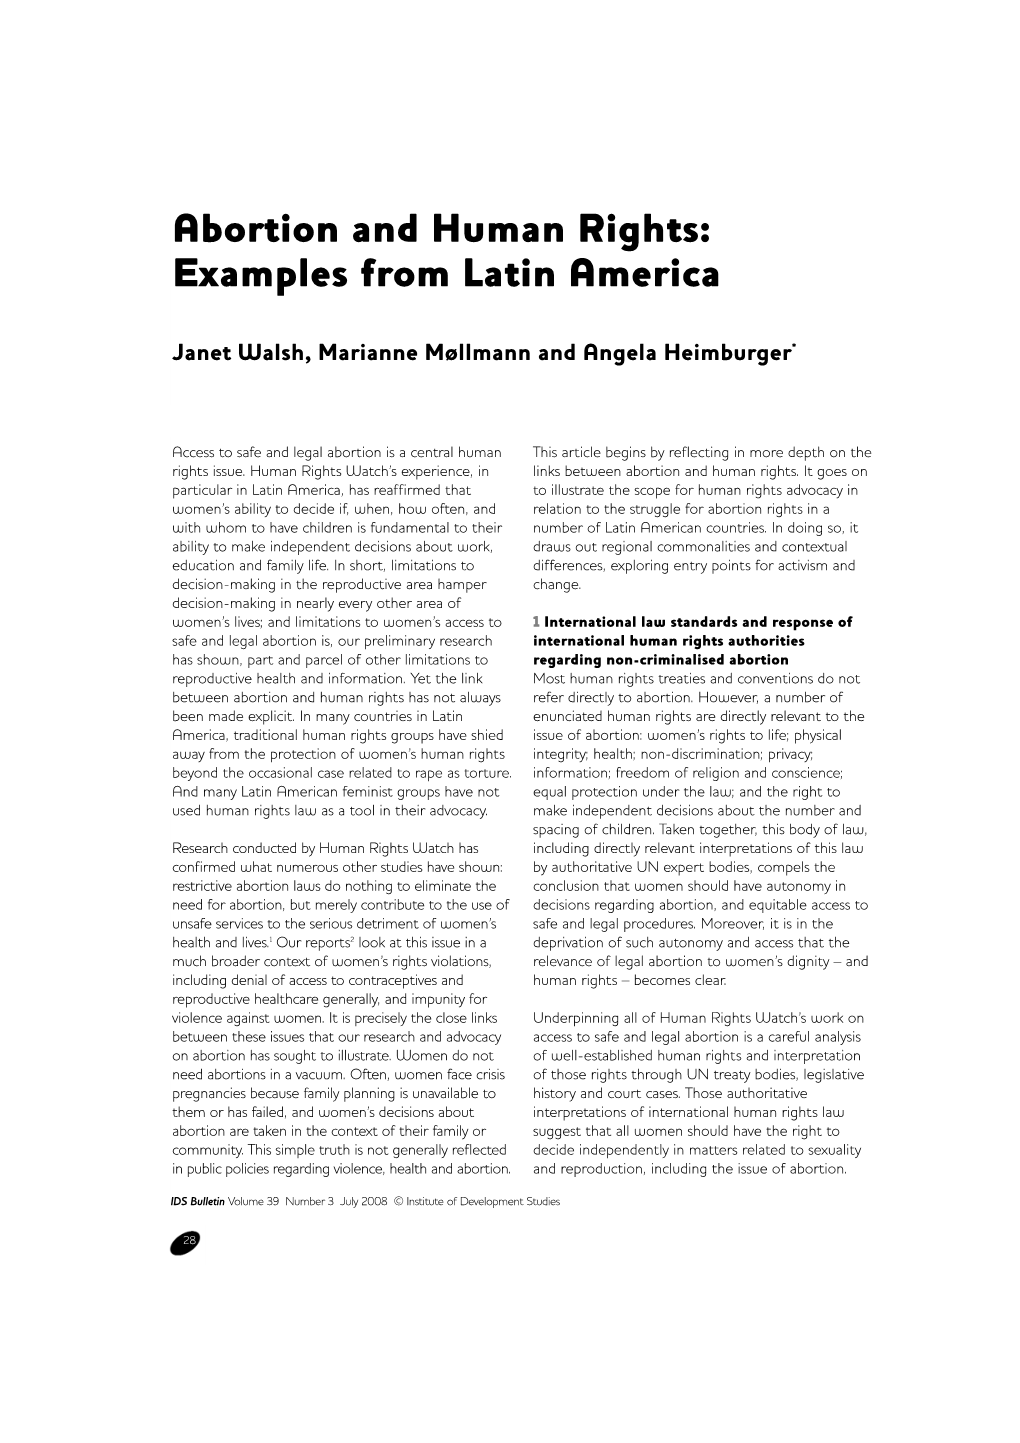 Abortion and Human Rights: Examples from Latin America